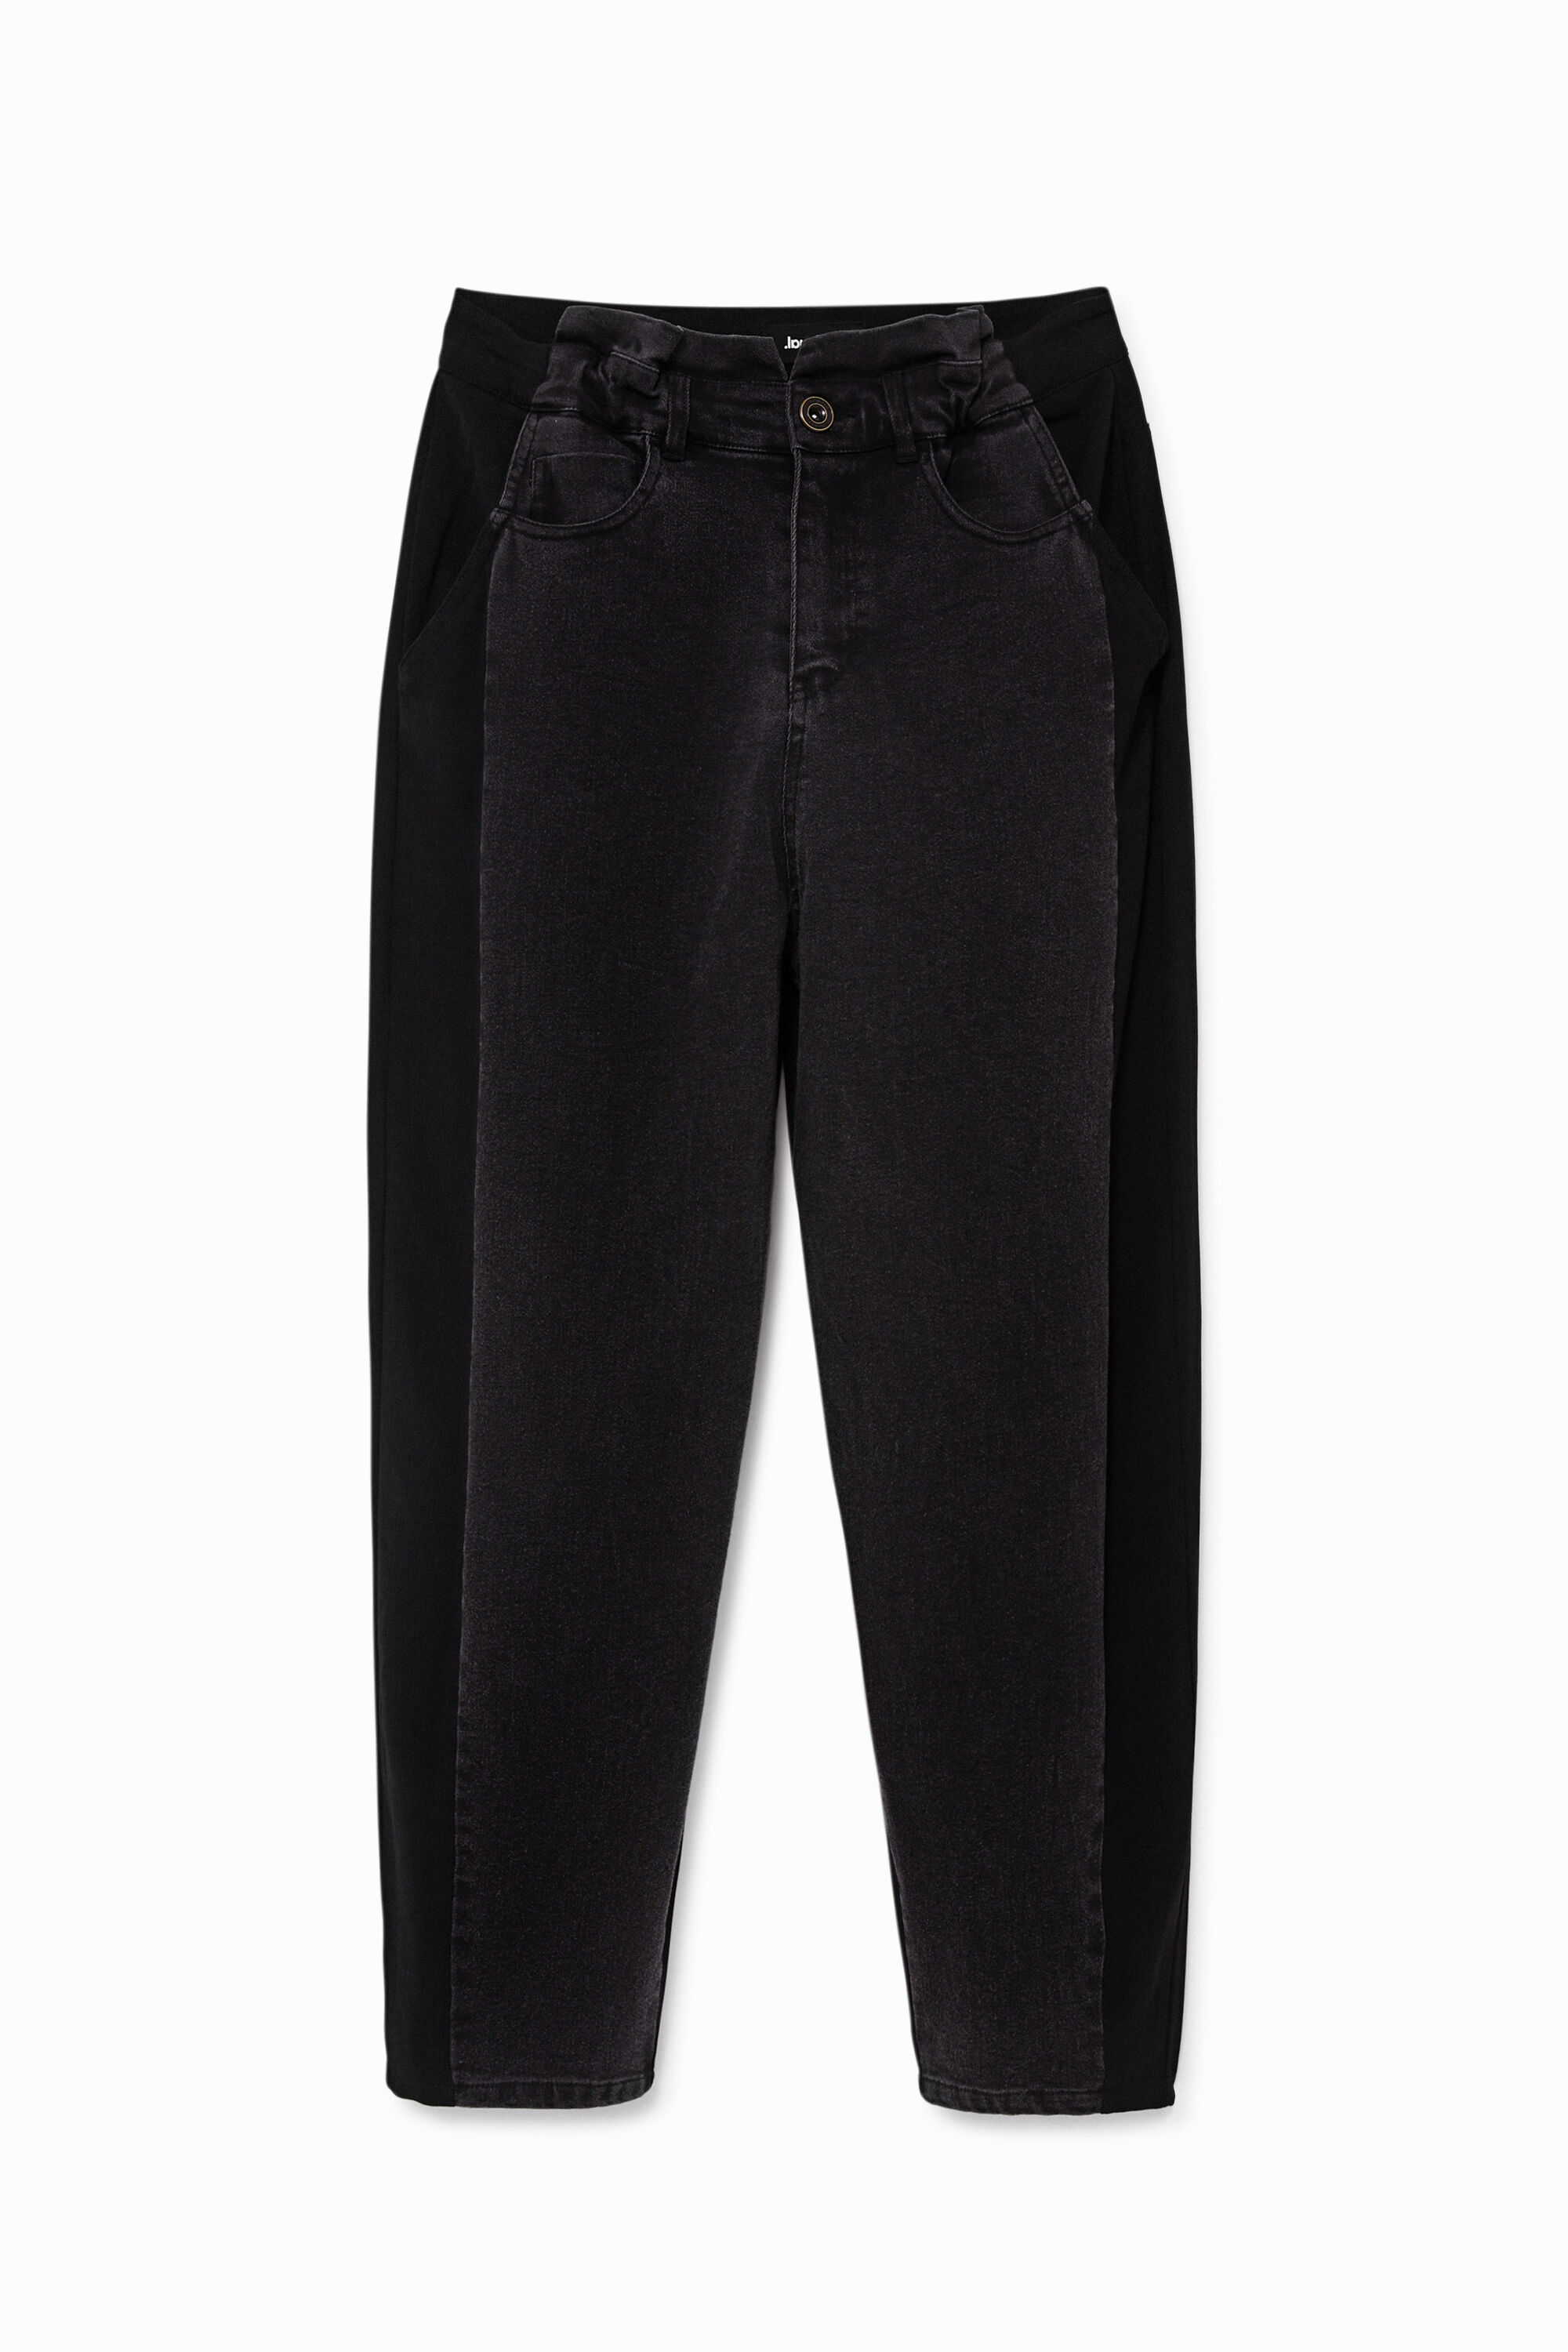 Desigual Hybrid Slouchy Trousers In Black